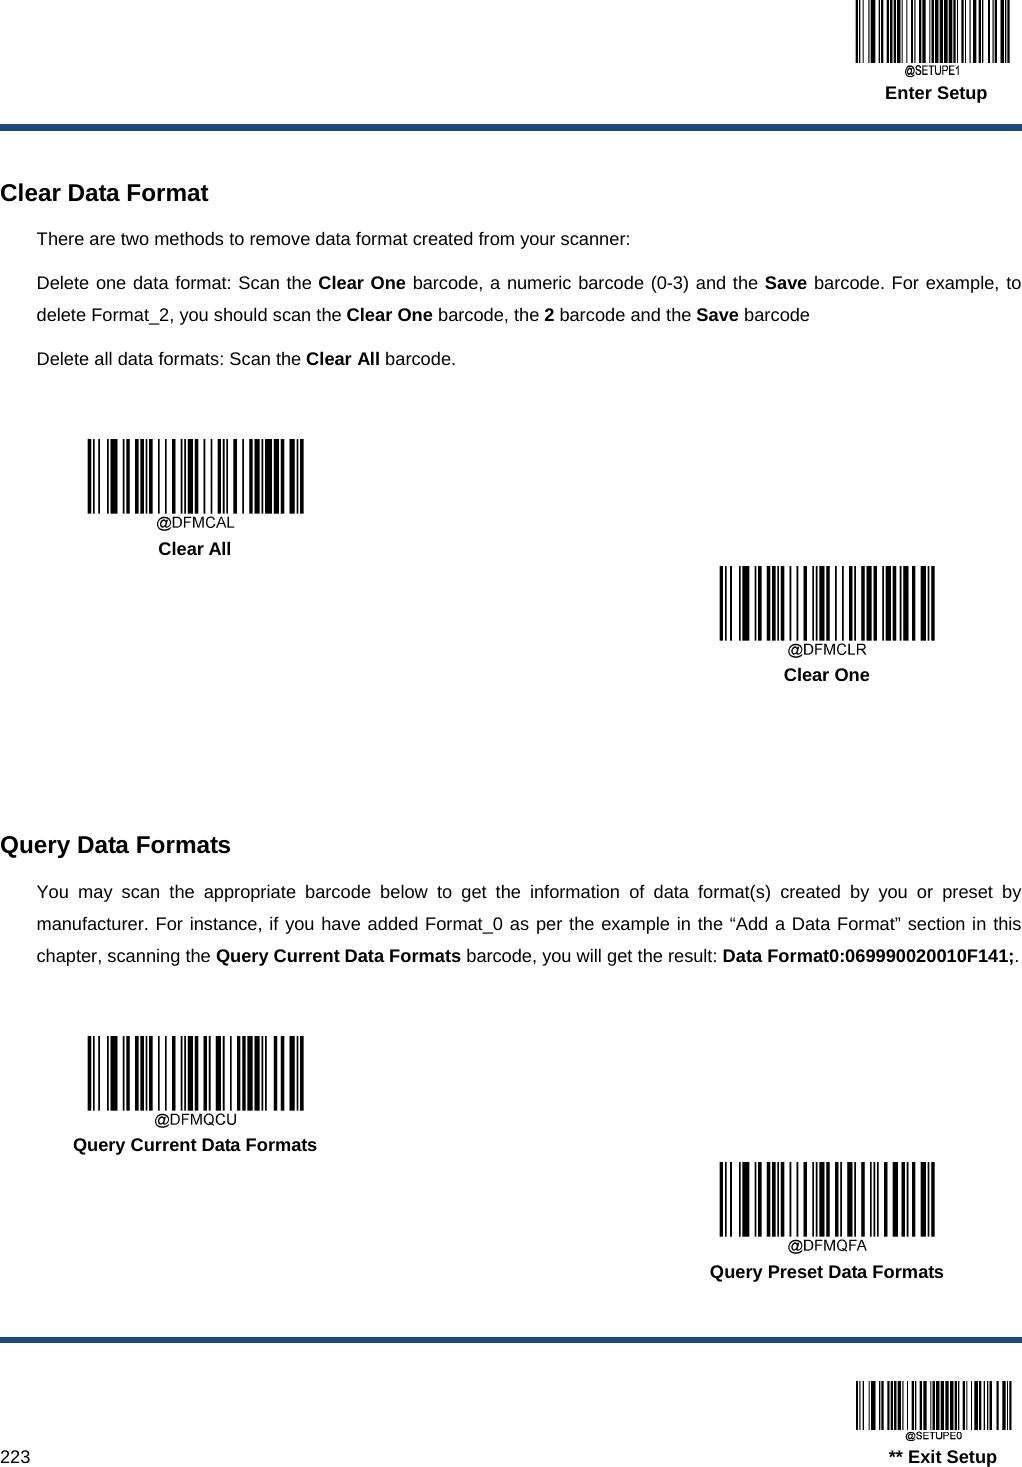  Enter Setup  223                                                                                   ** Exit Setup  Clear Data Format There are two methods to remove data format created from your scanner: Delete one data format: Scan the Clear One barcode, a numeric barcode (0-3) and the Save barcode. For example, to delete Format_2, you should scan the Clear One barcode, the 2 barcode and the Save barcode Delete all data formats: Scan the Clear All barcode.      Clear All      Clear One     Query Data Formats You may scan the appropriate barcode below to get the information of data format(s) created by you or preset by manufacturer. For instance, if you have added Format_0 as per the example in the “Add a Data Format” section in this chapter, scanning the Query Current Data Formats barcode, you will get the result: Data Format0:069990020010F141;.      Query Current Data Formats      Query Preset Data Formats 